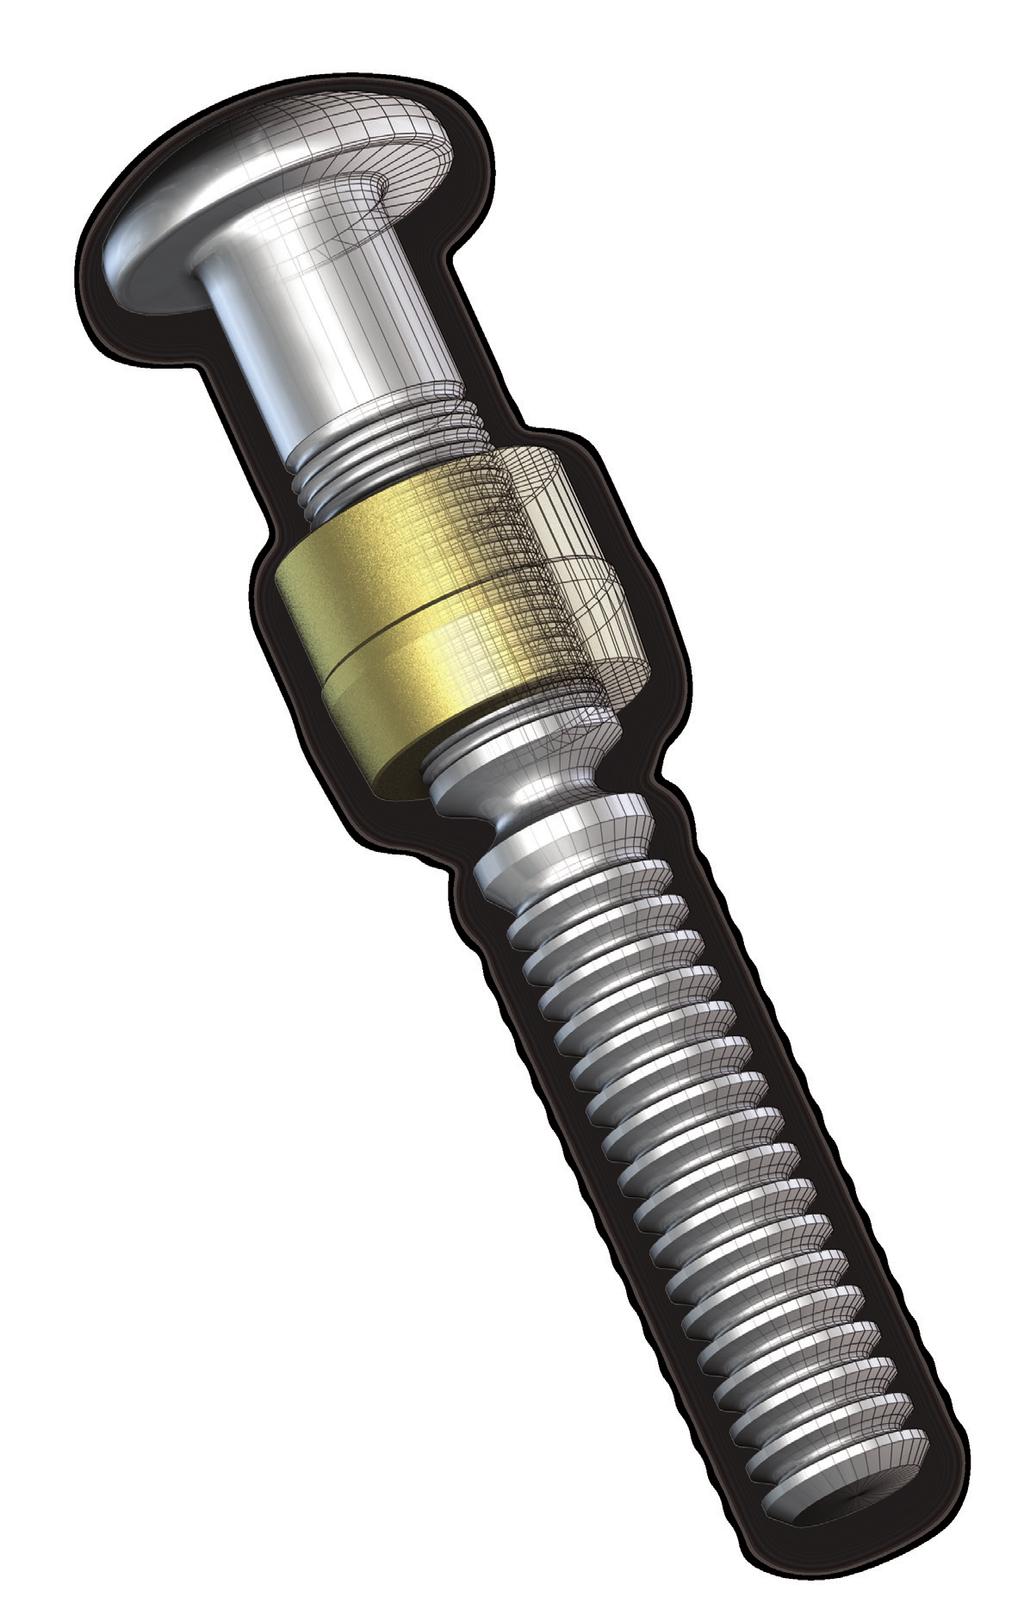 C50L uckbolt rade 5 Fasteners Certified to Meet or Exceed all ASTM A-325 Standards For applications ranging from railcar to mining equipment manufacturing, C50L uckbolt fasteners from